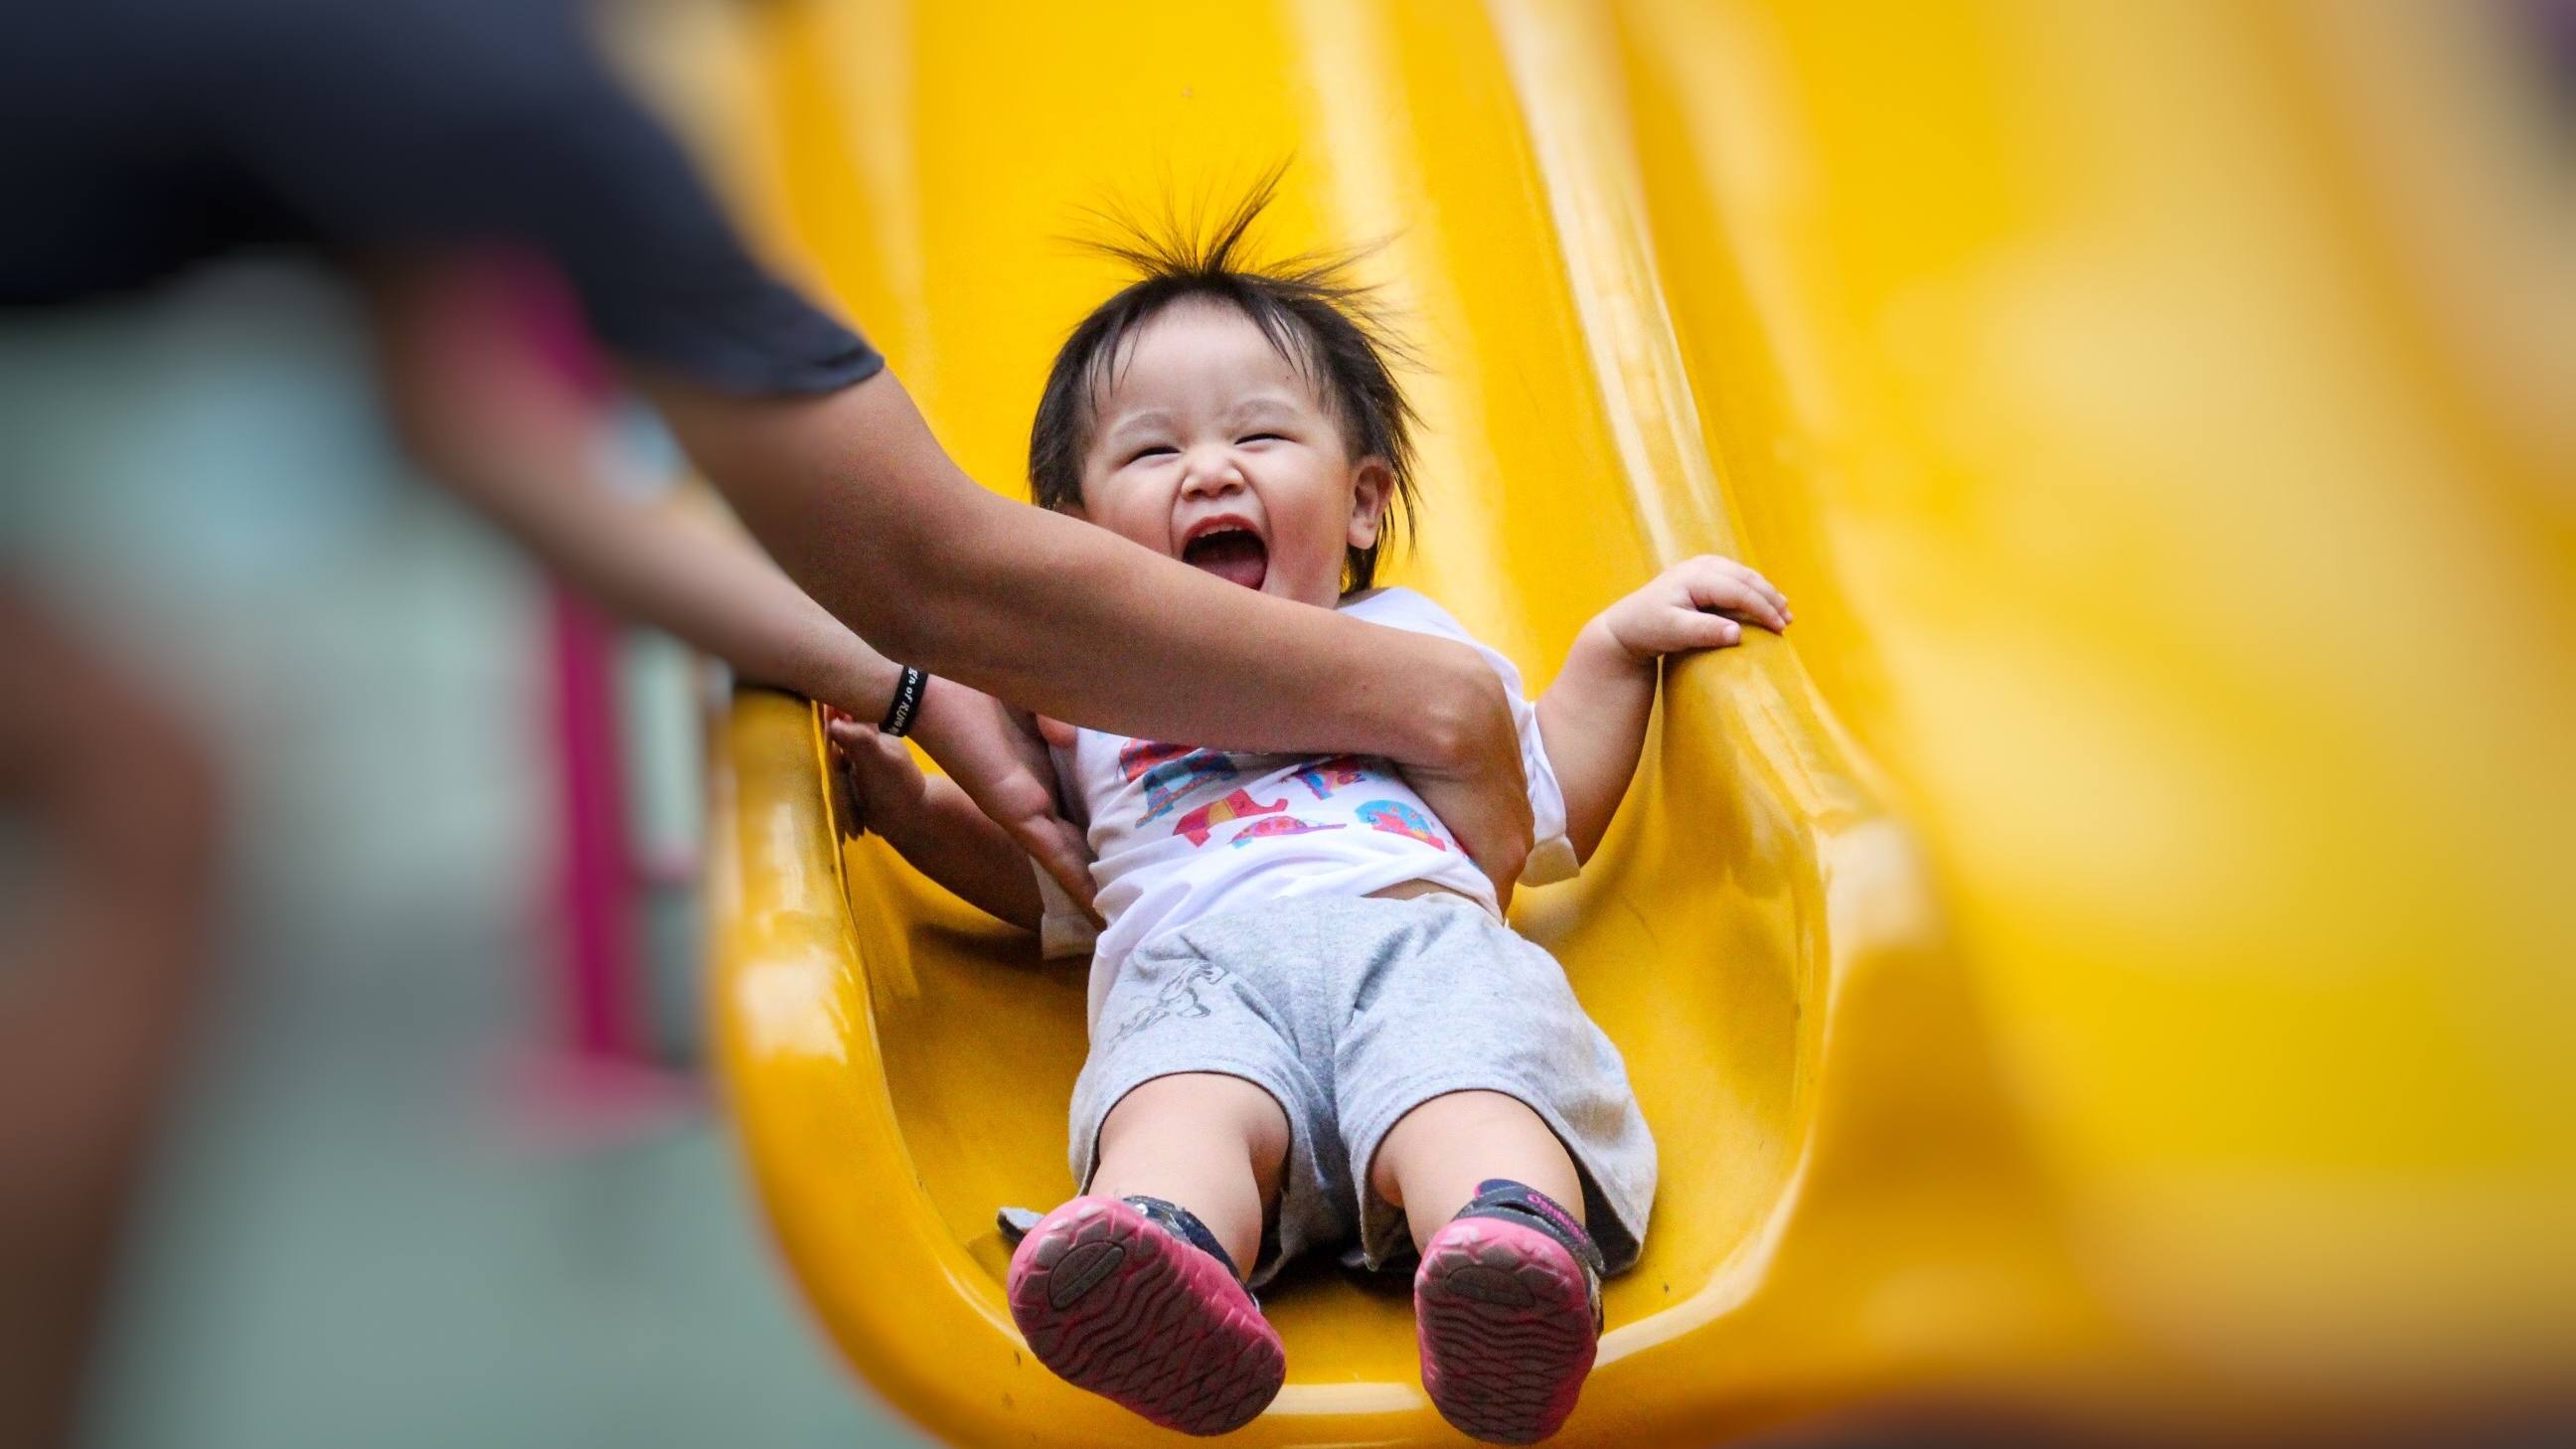 The Dangerous Link Between Sliding With A Toddler On The Lap And